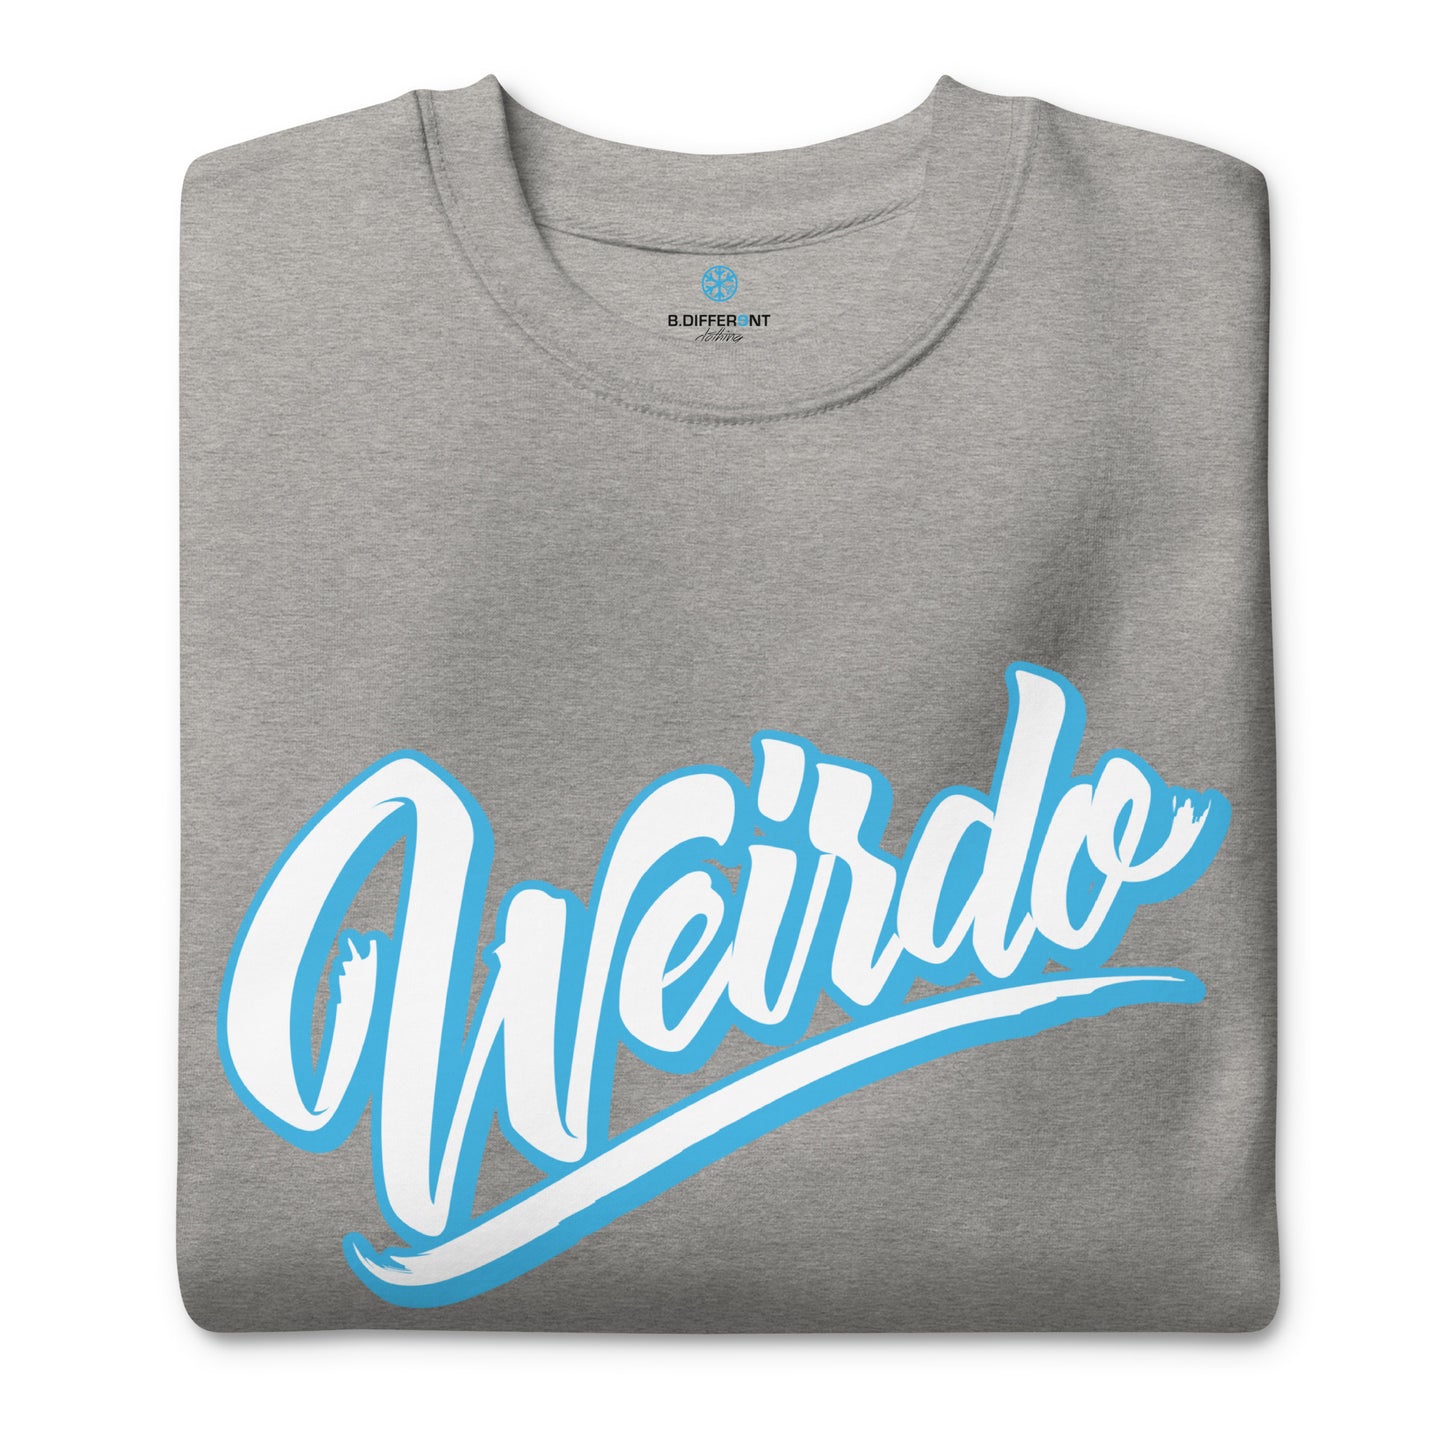 folded sweatshirt Weirdo gray by B.Different Clothing independent streetwear brand inspired by street art graffiti